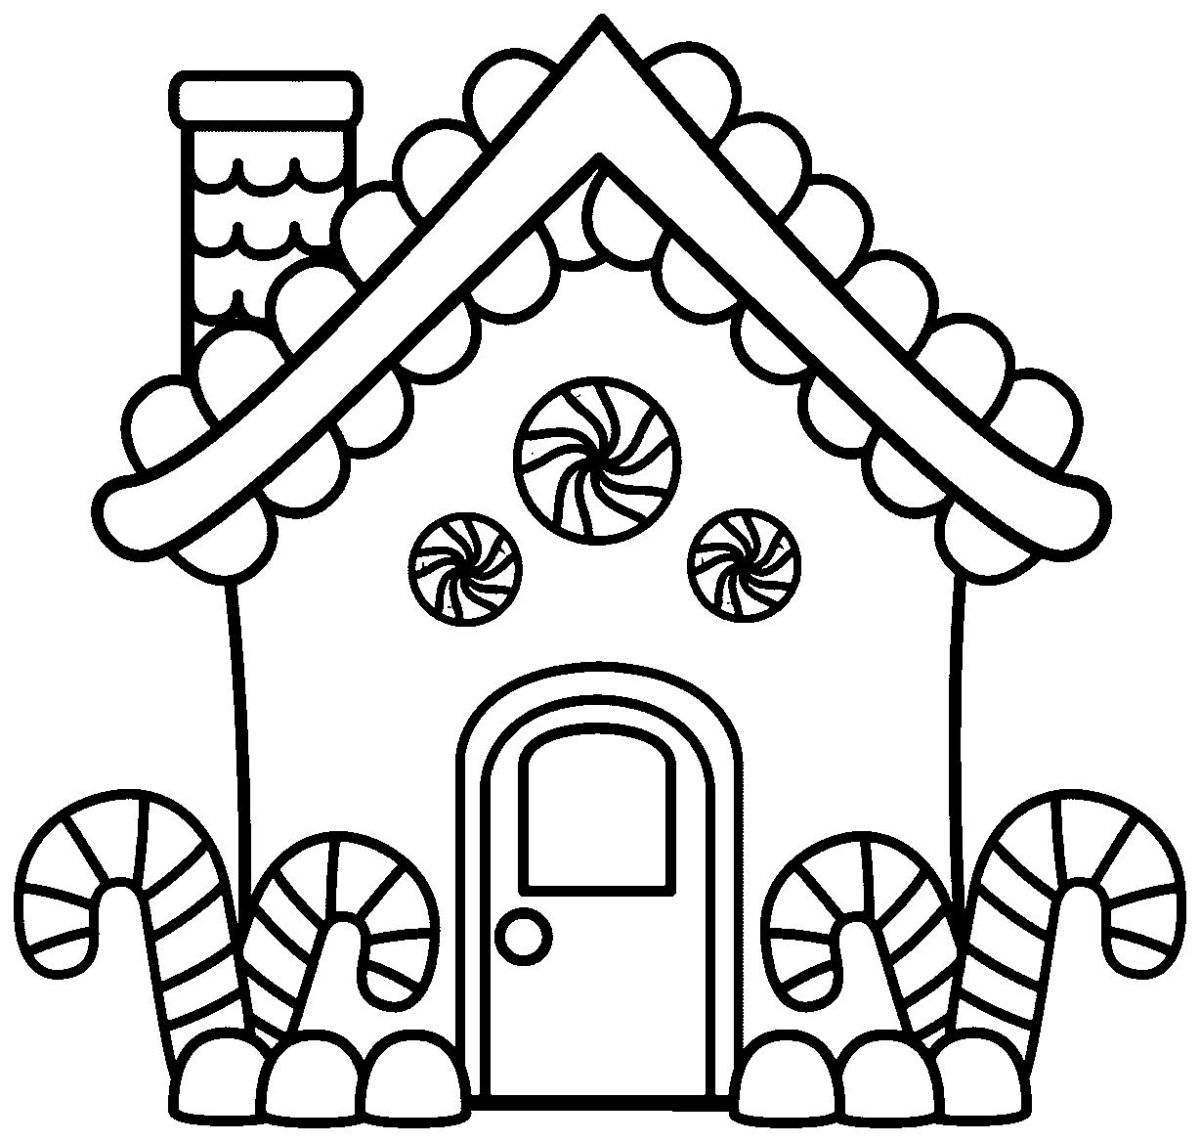 Fancy hut coloring pages for kids